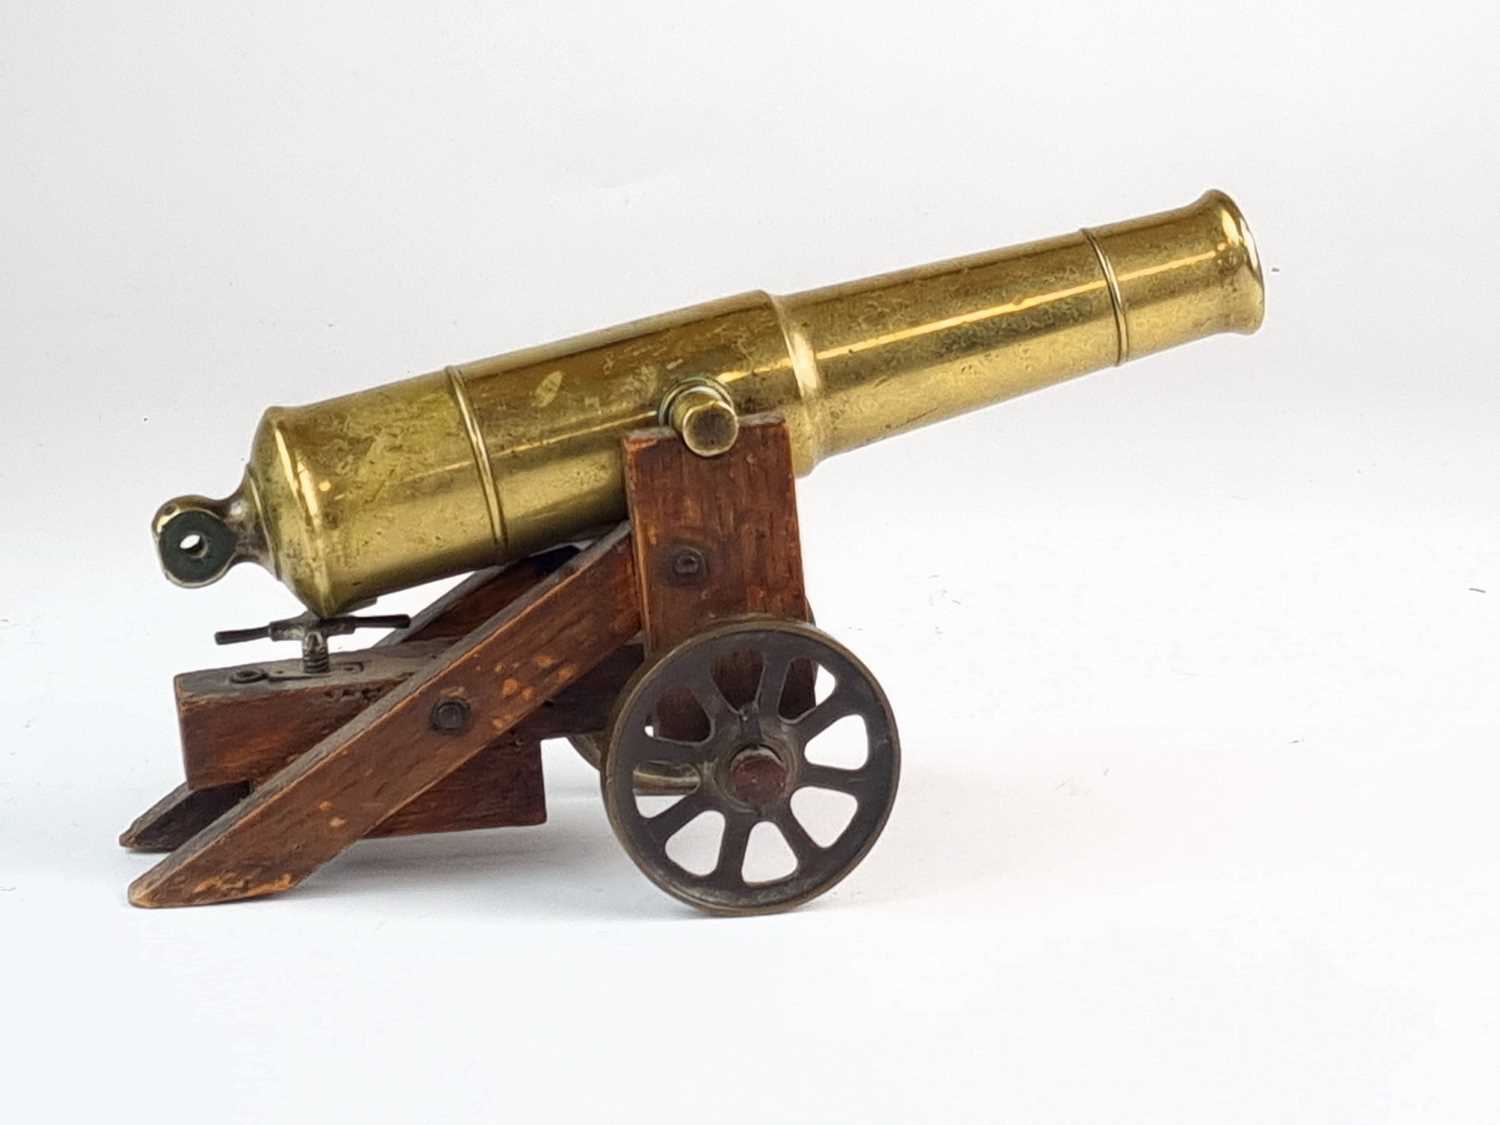 Lot Brass model of a cannon, 19th century